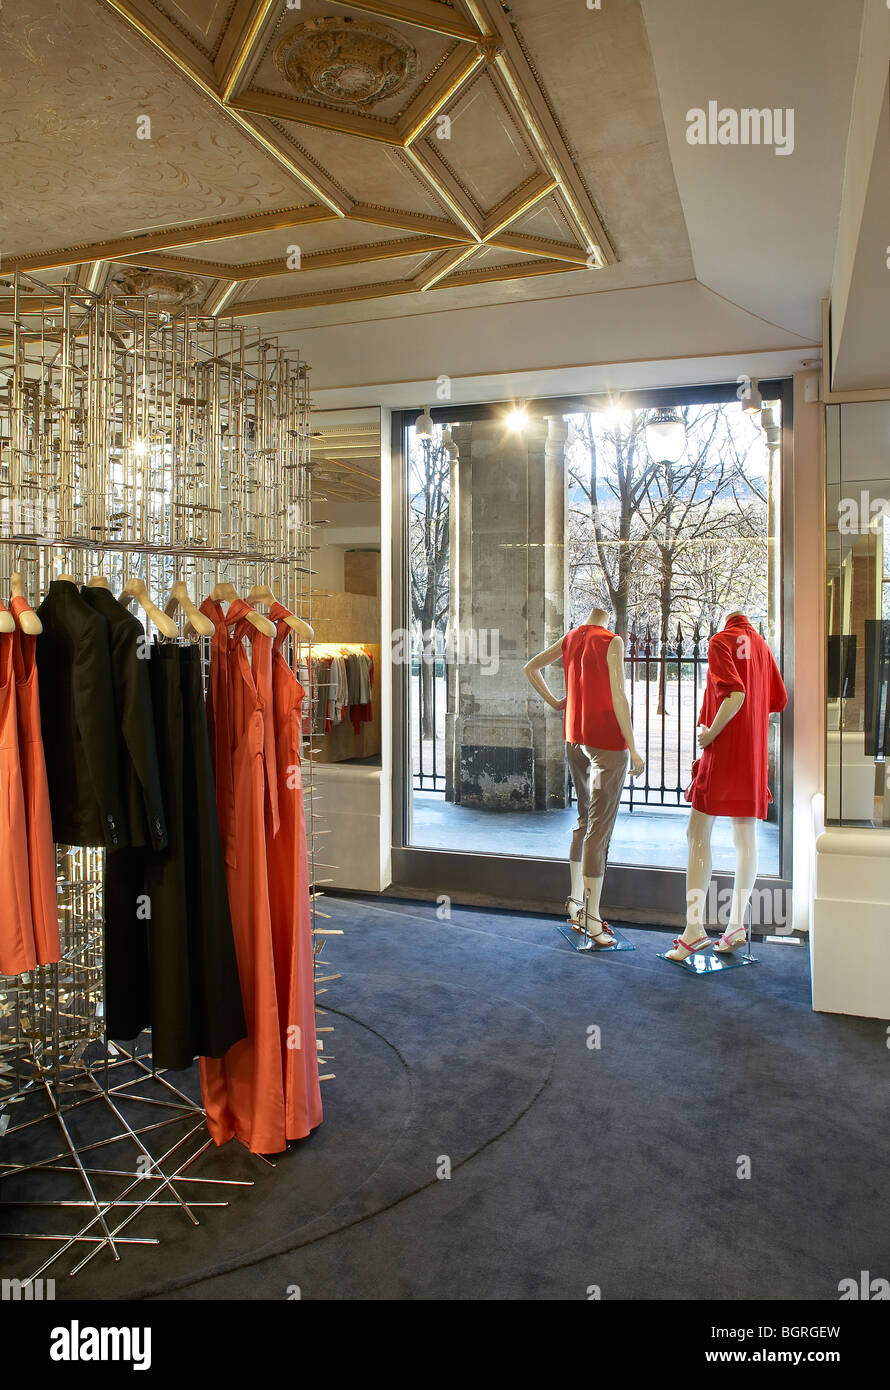 stella mccartney store, interior of store window with mannequins Stock ...